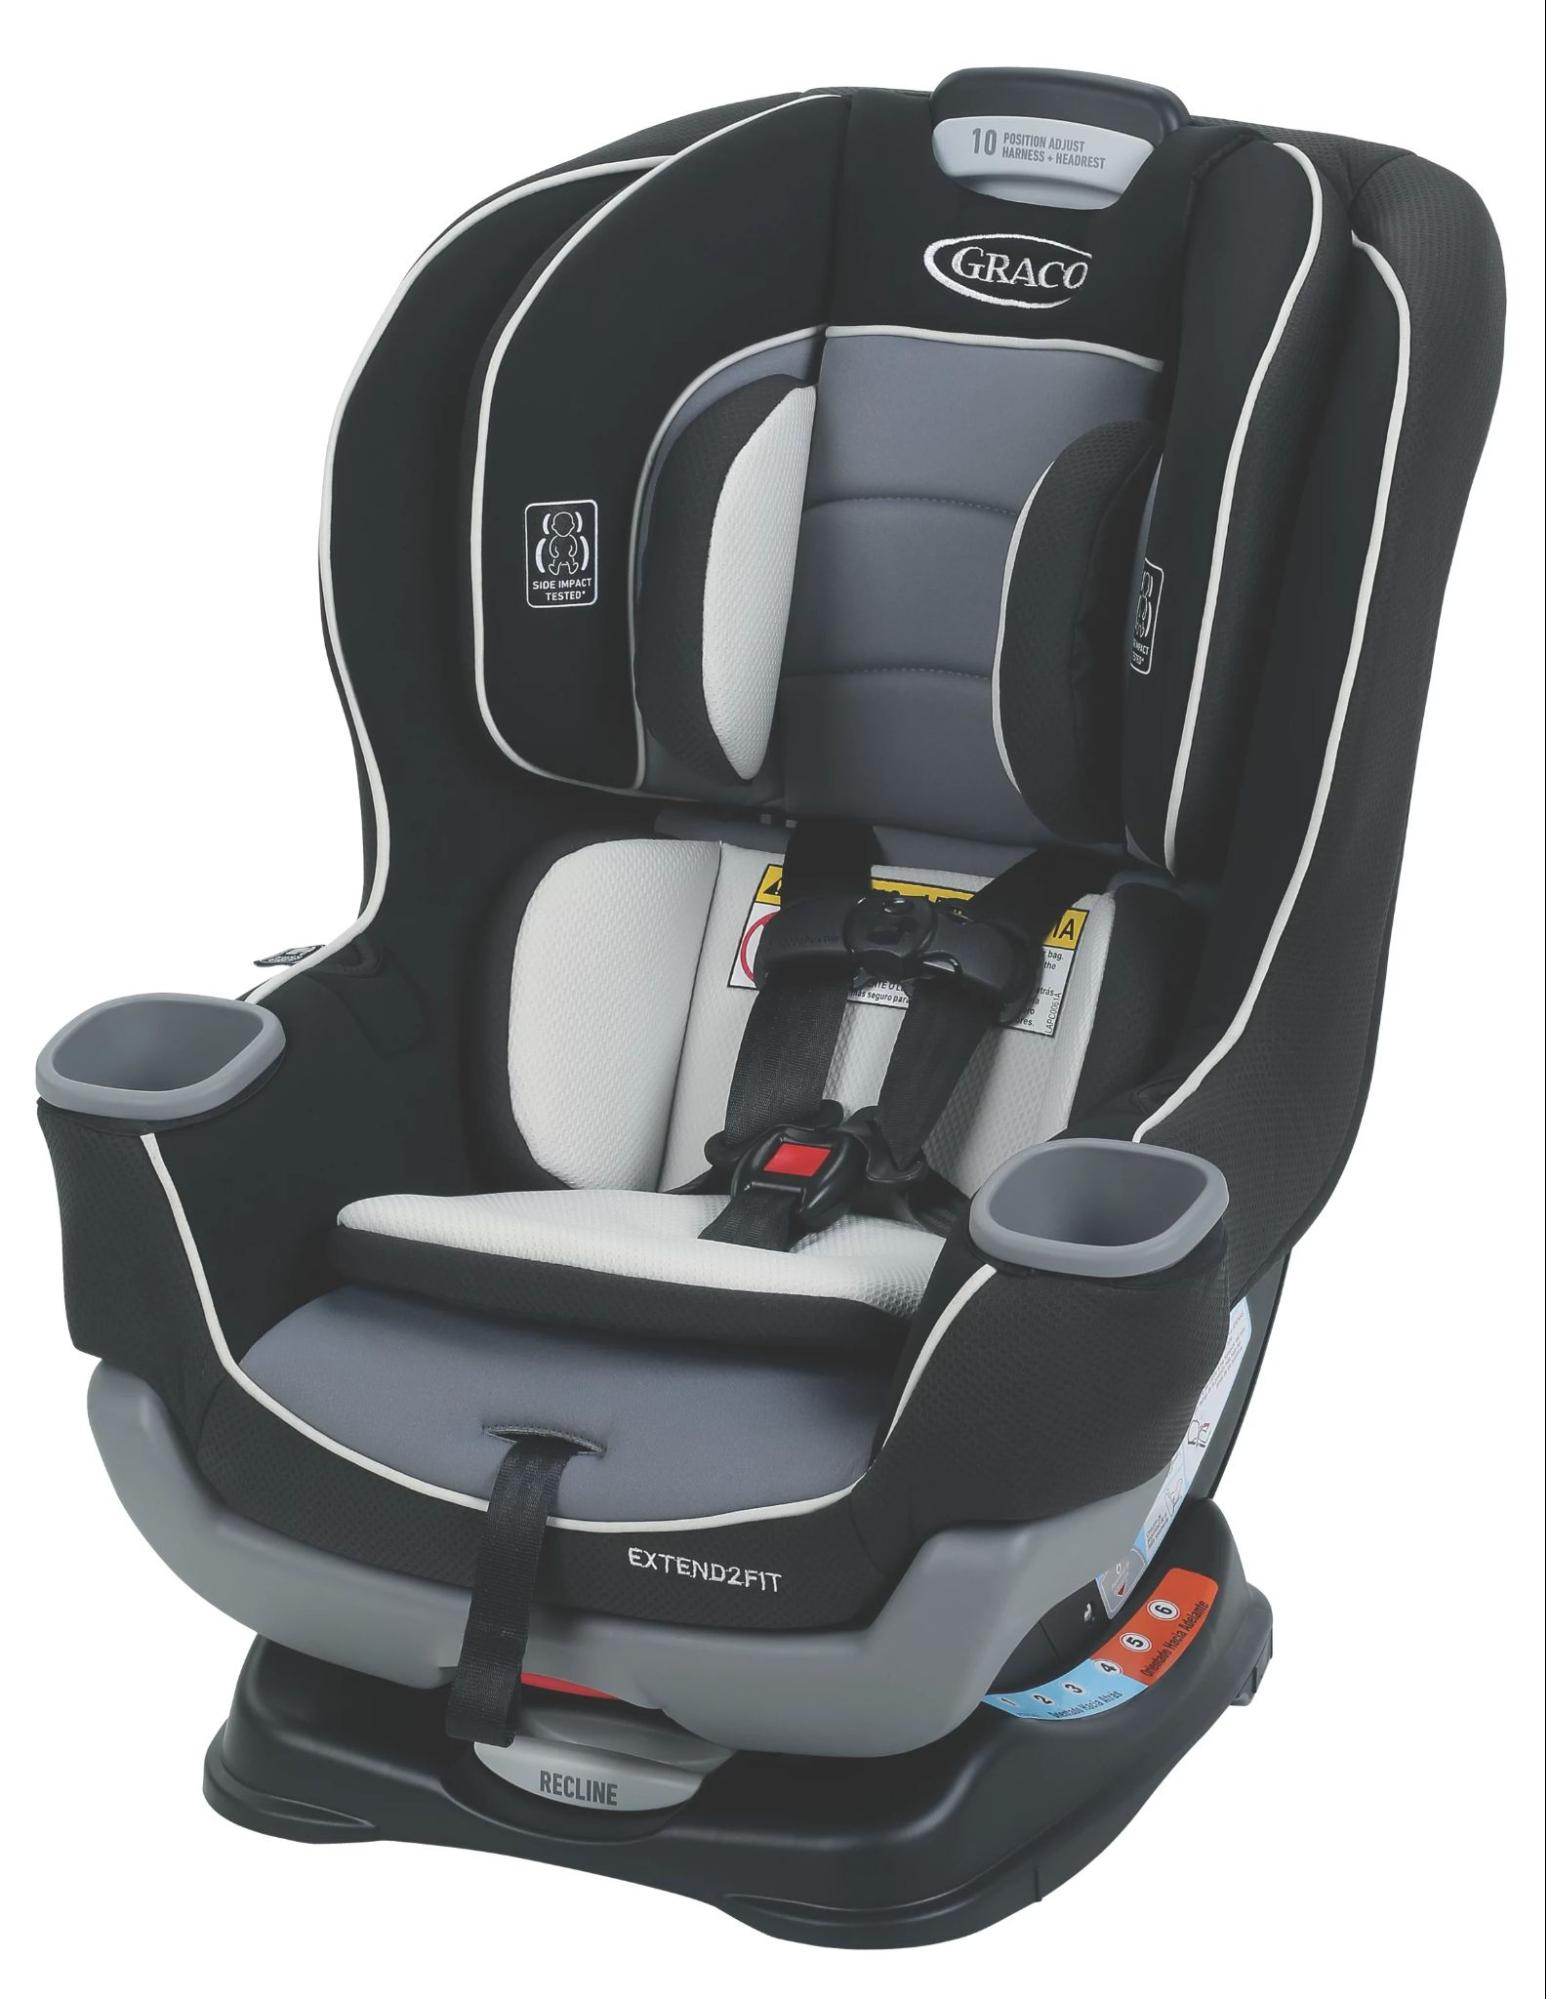 Graco Extend2Fit Convertible car seat